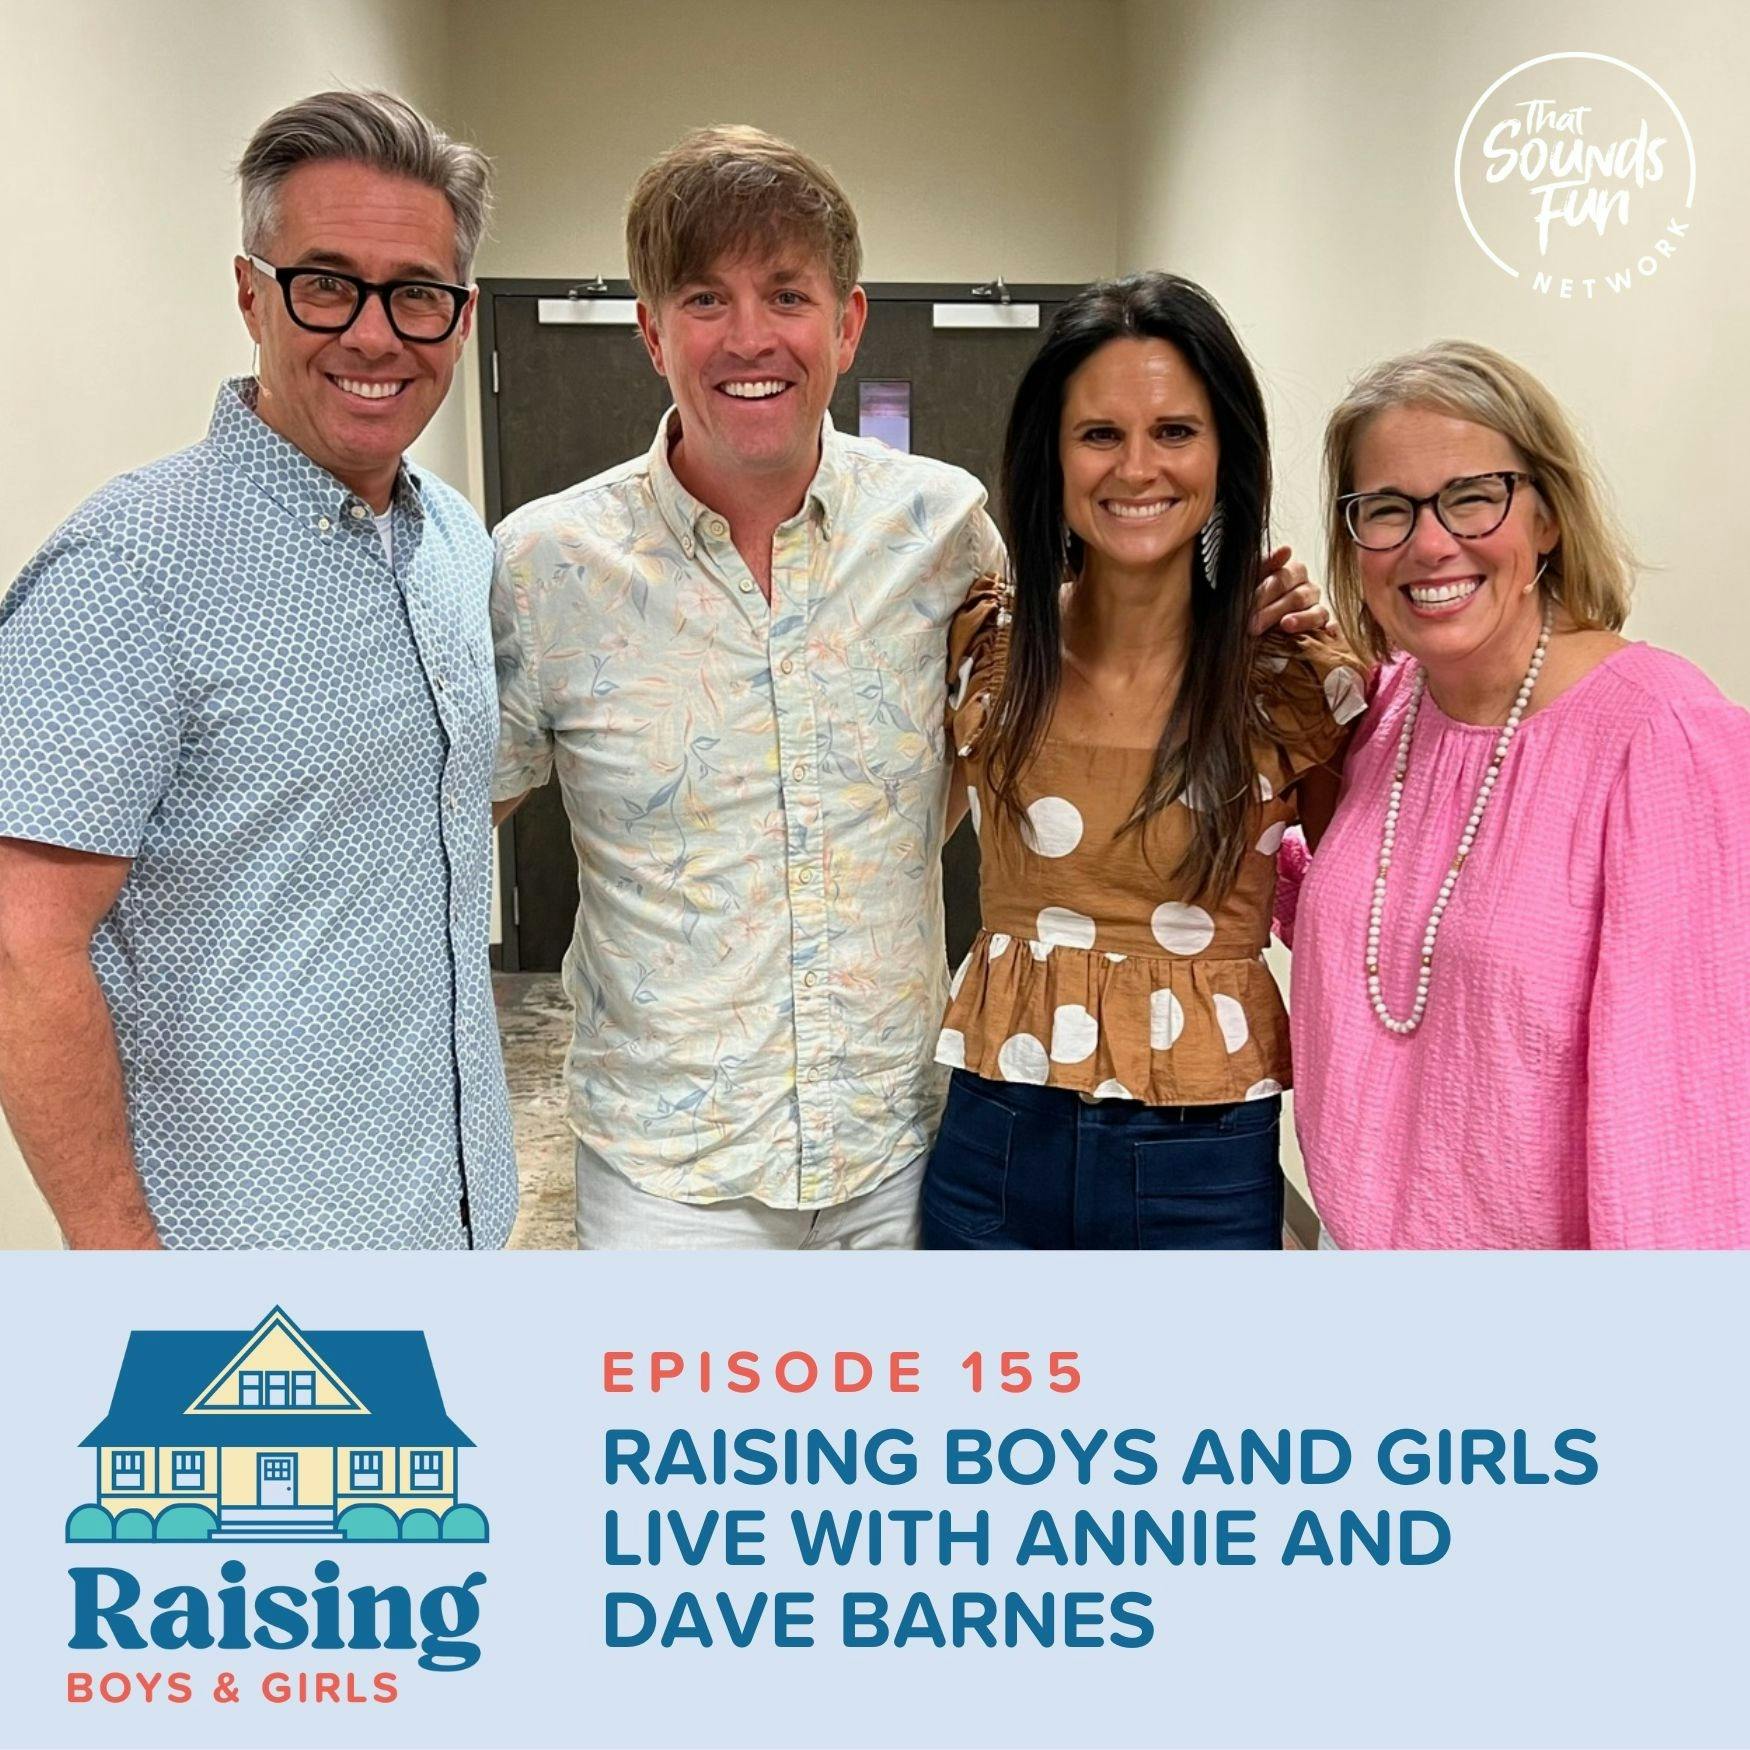 Episode 155: Raising Boys and Girls Live with Annie and Dave Barnes